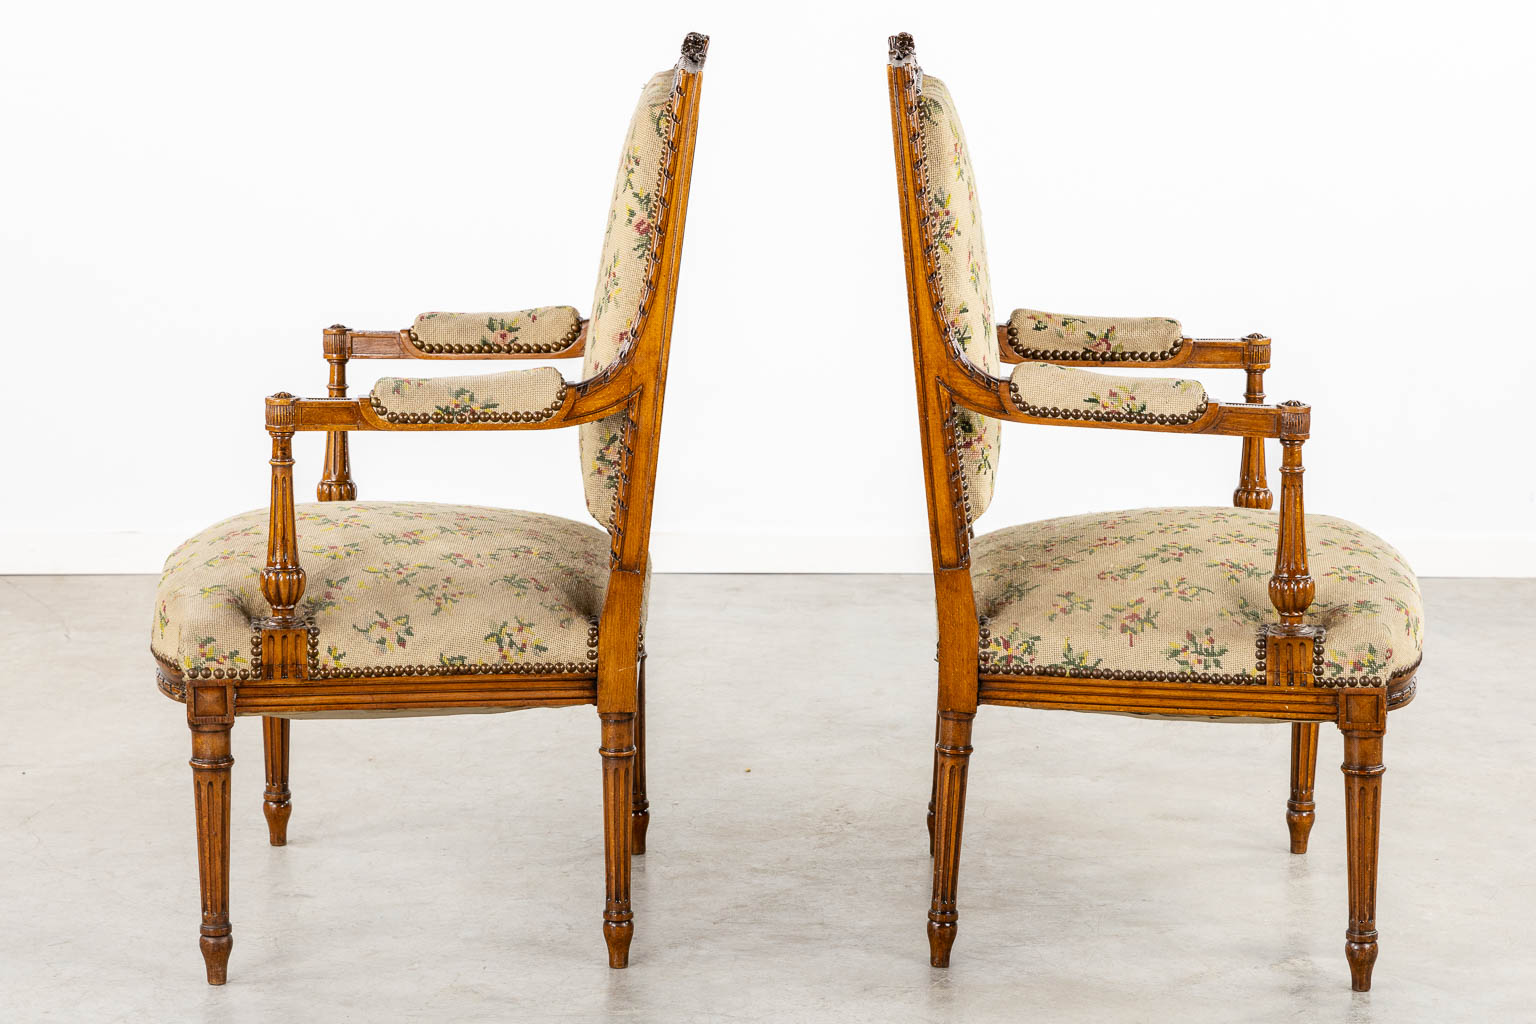 A pair of wood-sculptured armchairs with emboidered upholstry. Louis XVI style. (L:62 x W:64 x H:100 cm)